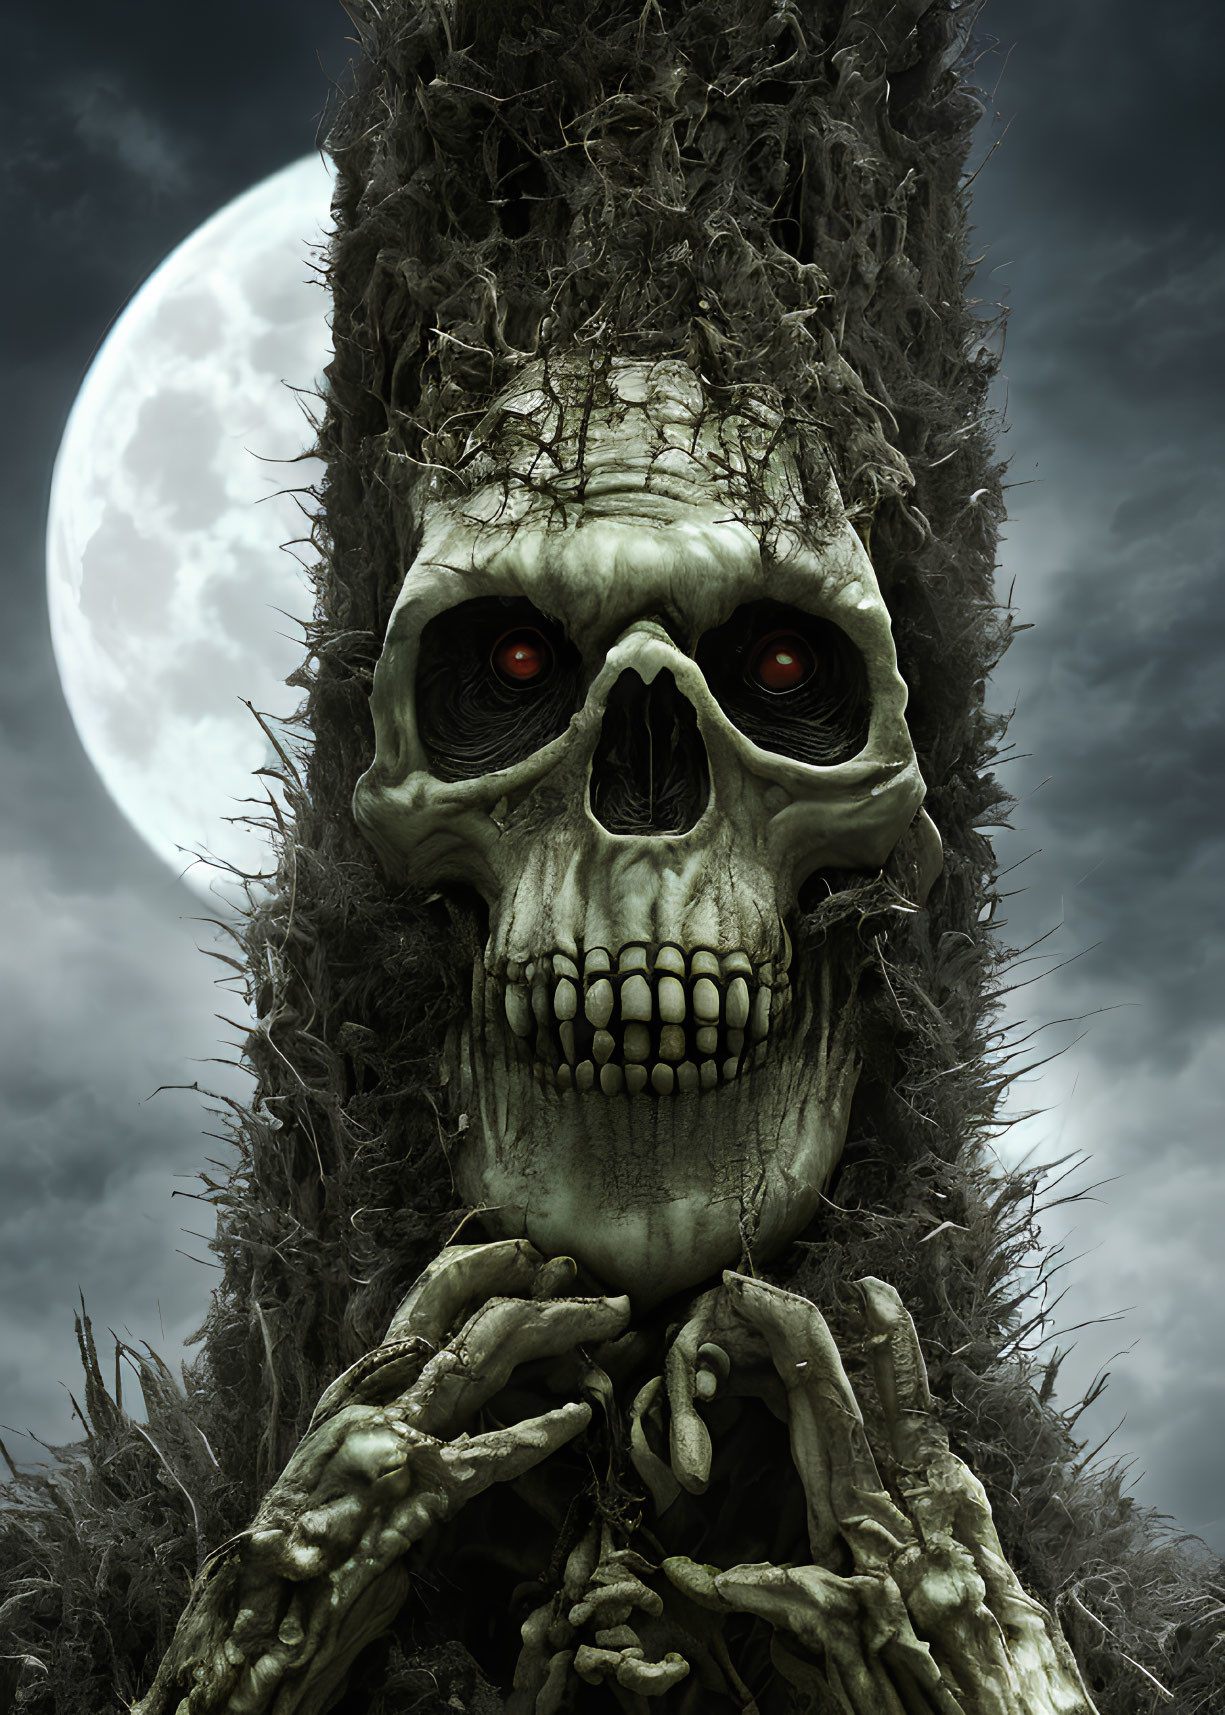 Glowing red-eyed skull with bony hands and moss-covered hat under full moon